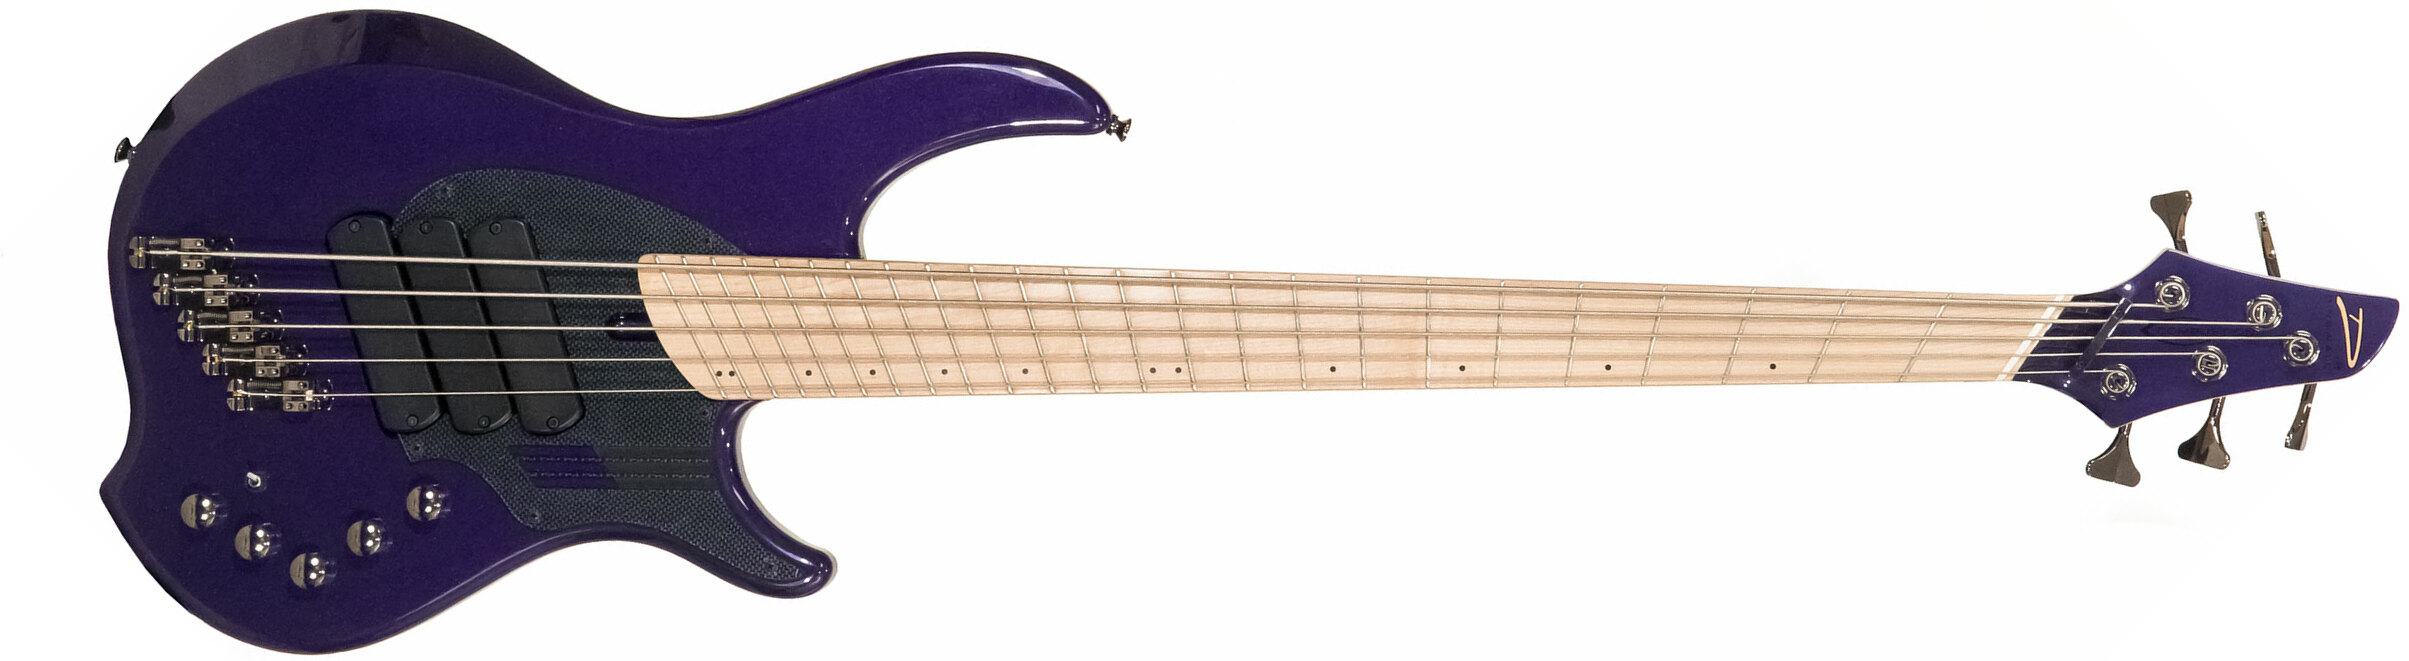 Dingwall Adam Nolly Getgood Ng3 5c Signature 3pu Active Mn - Purple Metallic - Basse Électrique Solid Body - Main picture